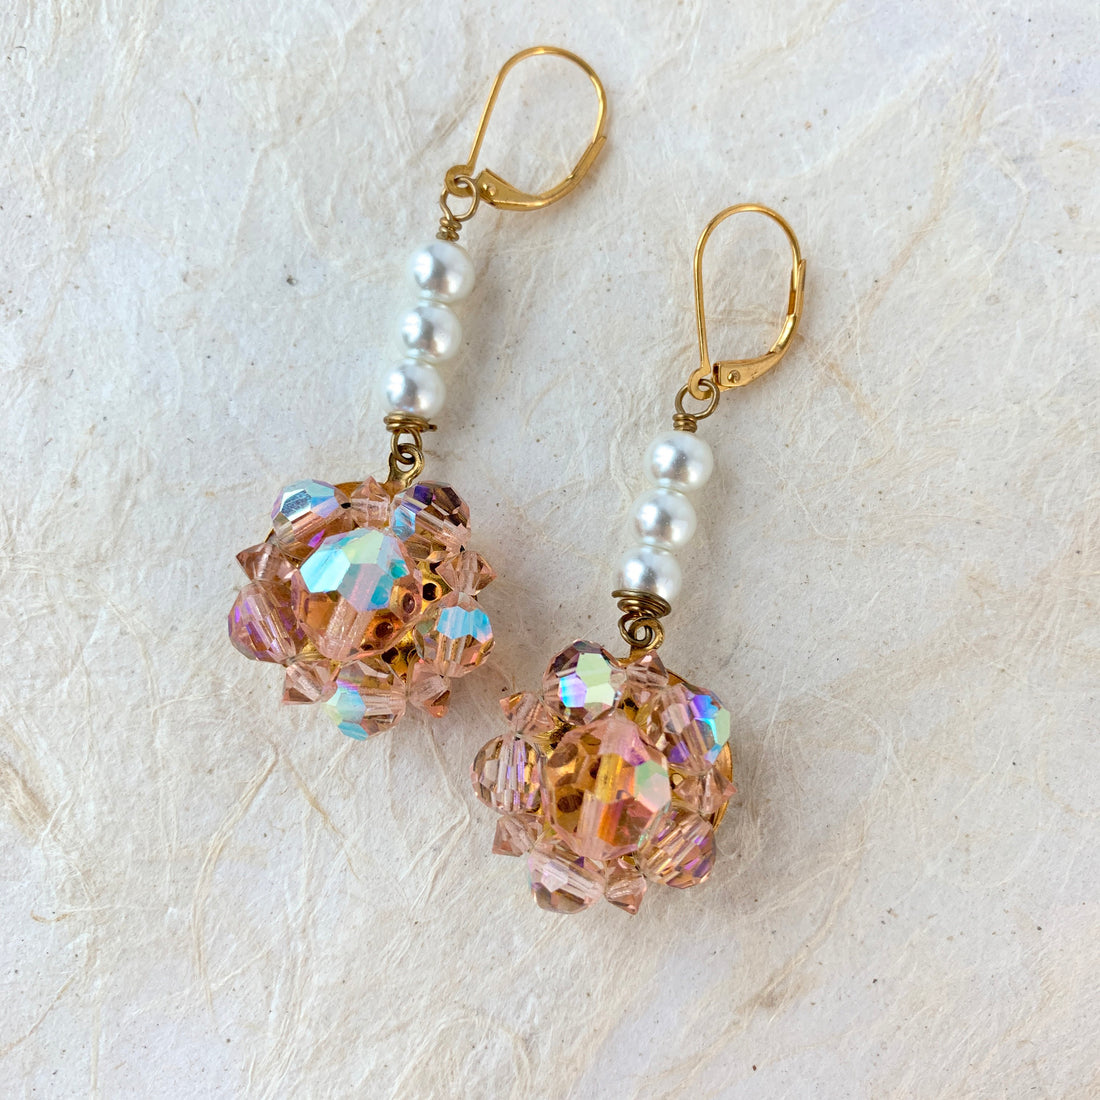 Lenora Dame Upcycled Earrings with Vintage Earring Piece - One-of-a-Kind